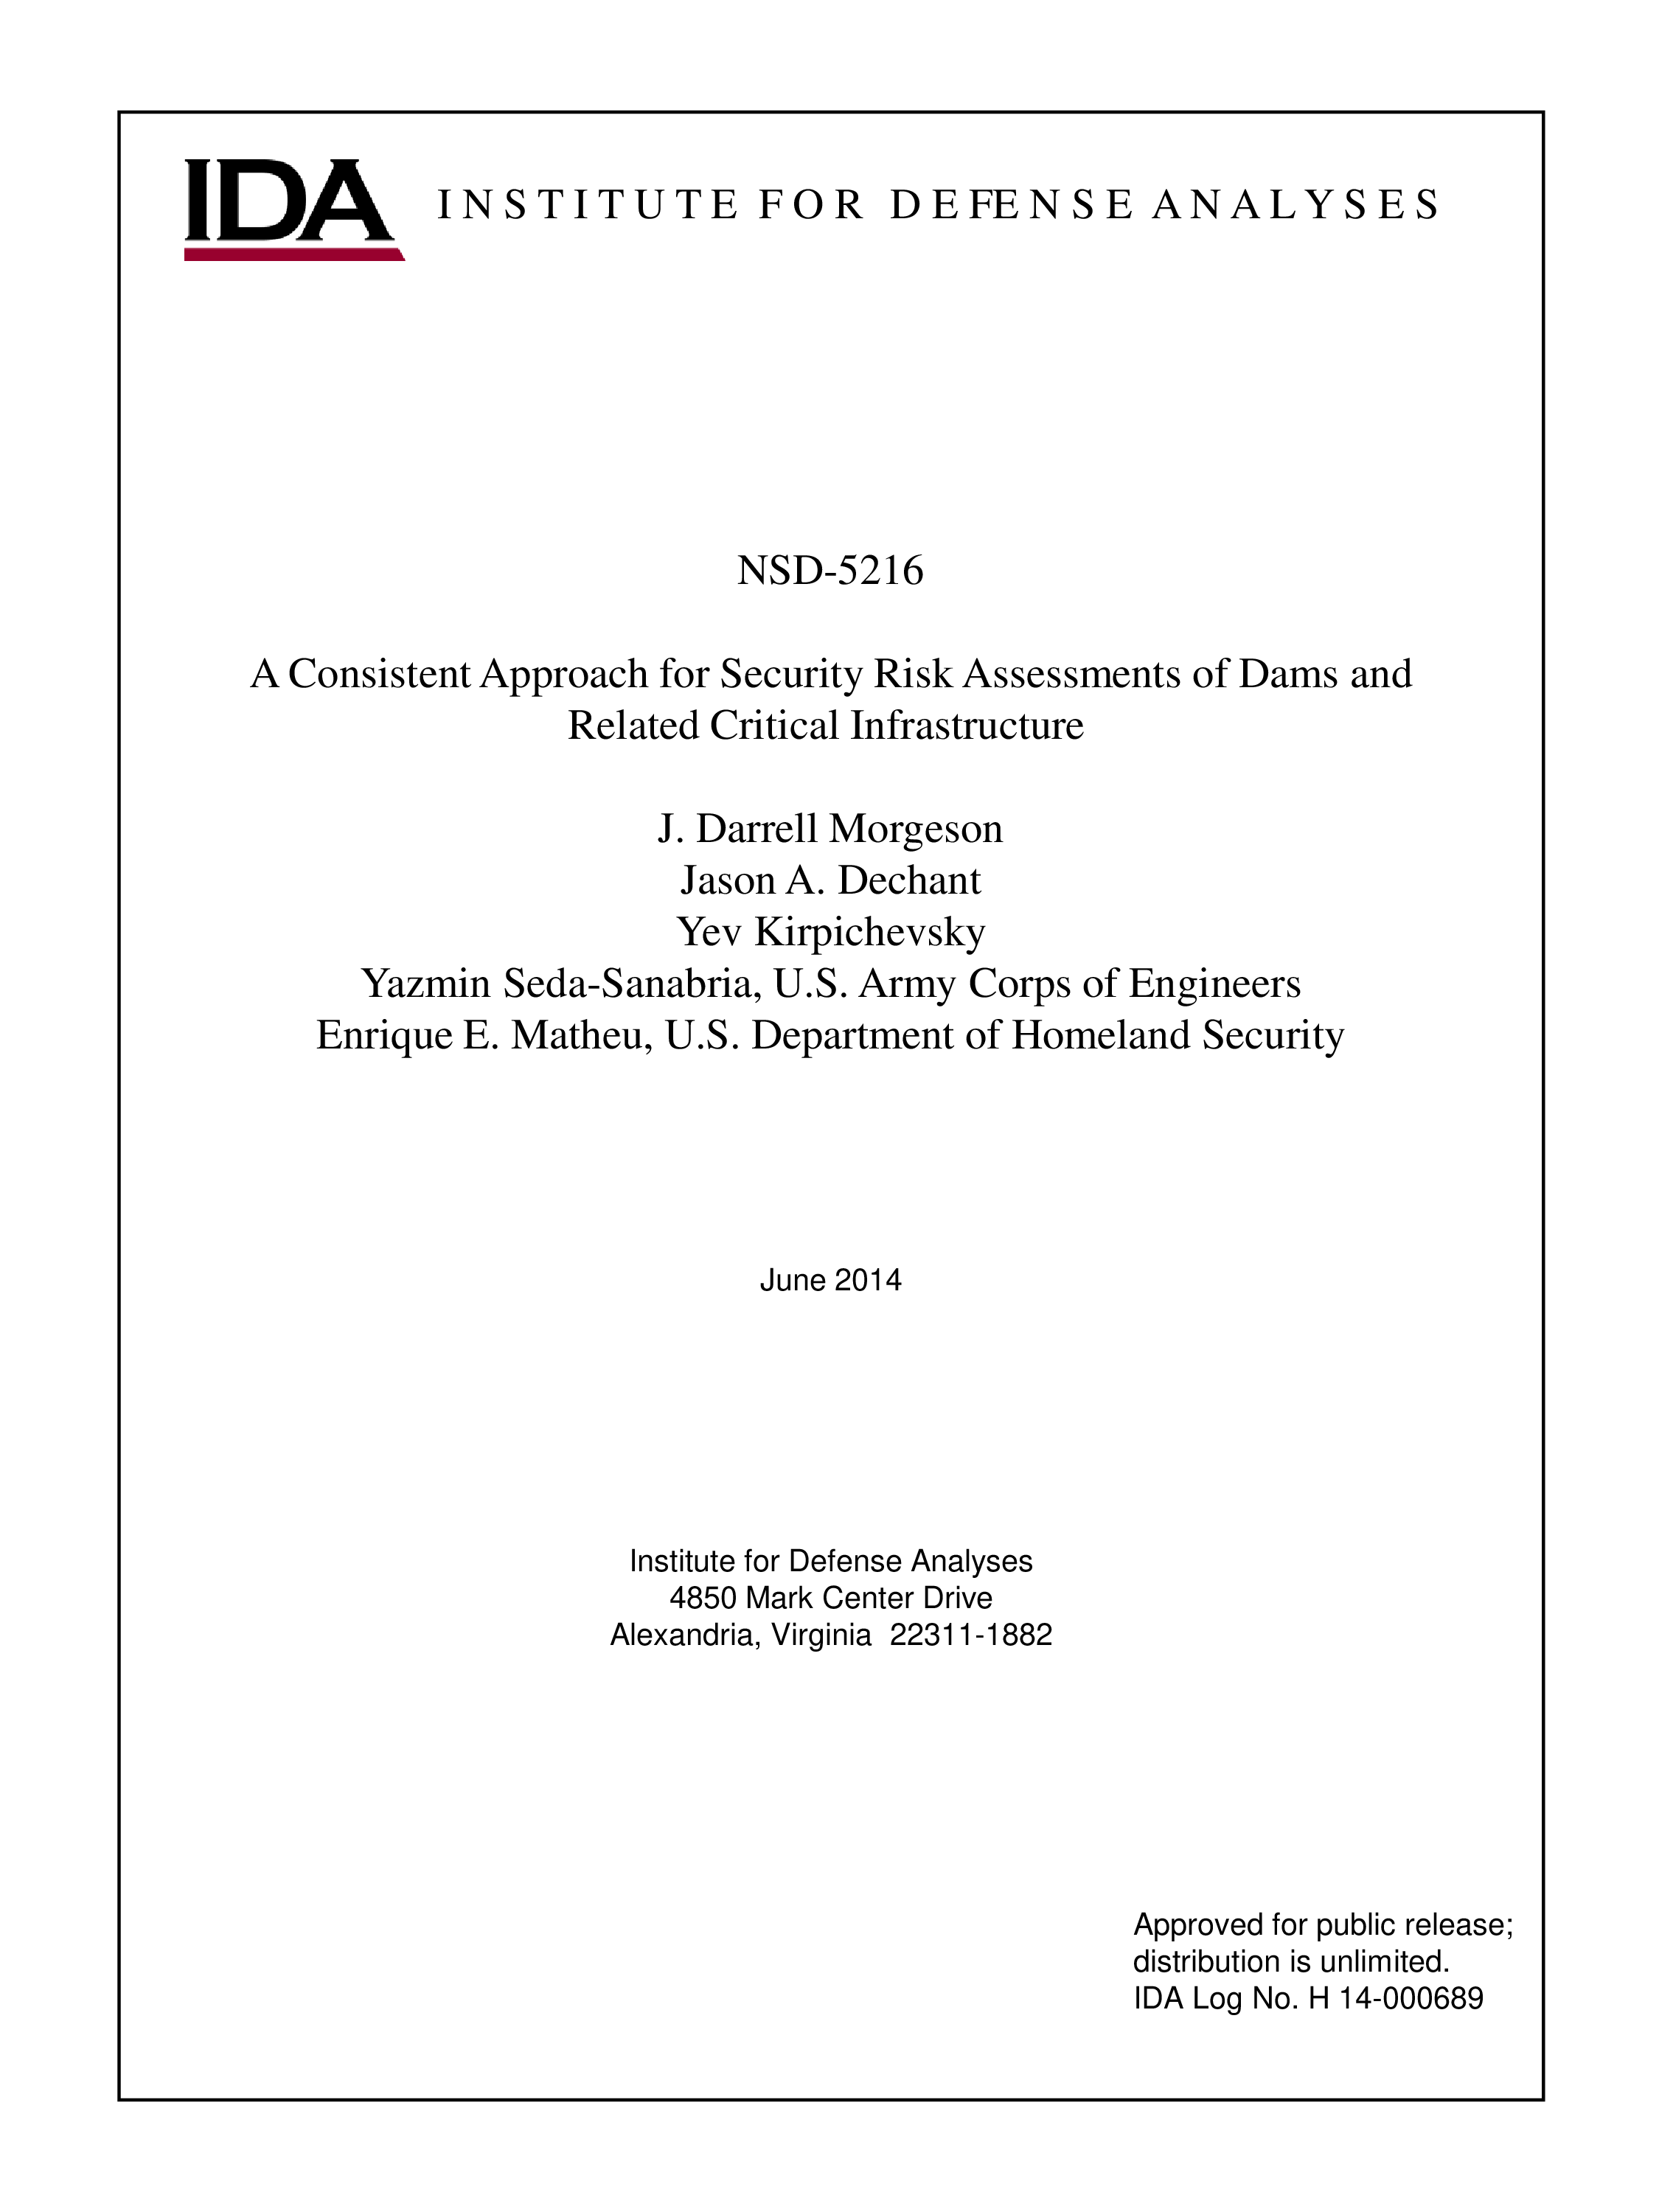 A Consistent Approach for Security Risk Assessments of Dams and Related Critical Infrastructure